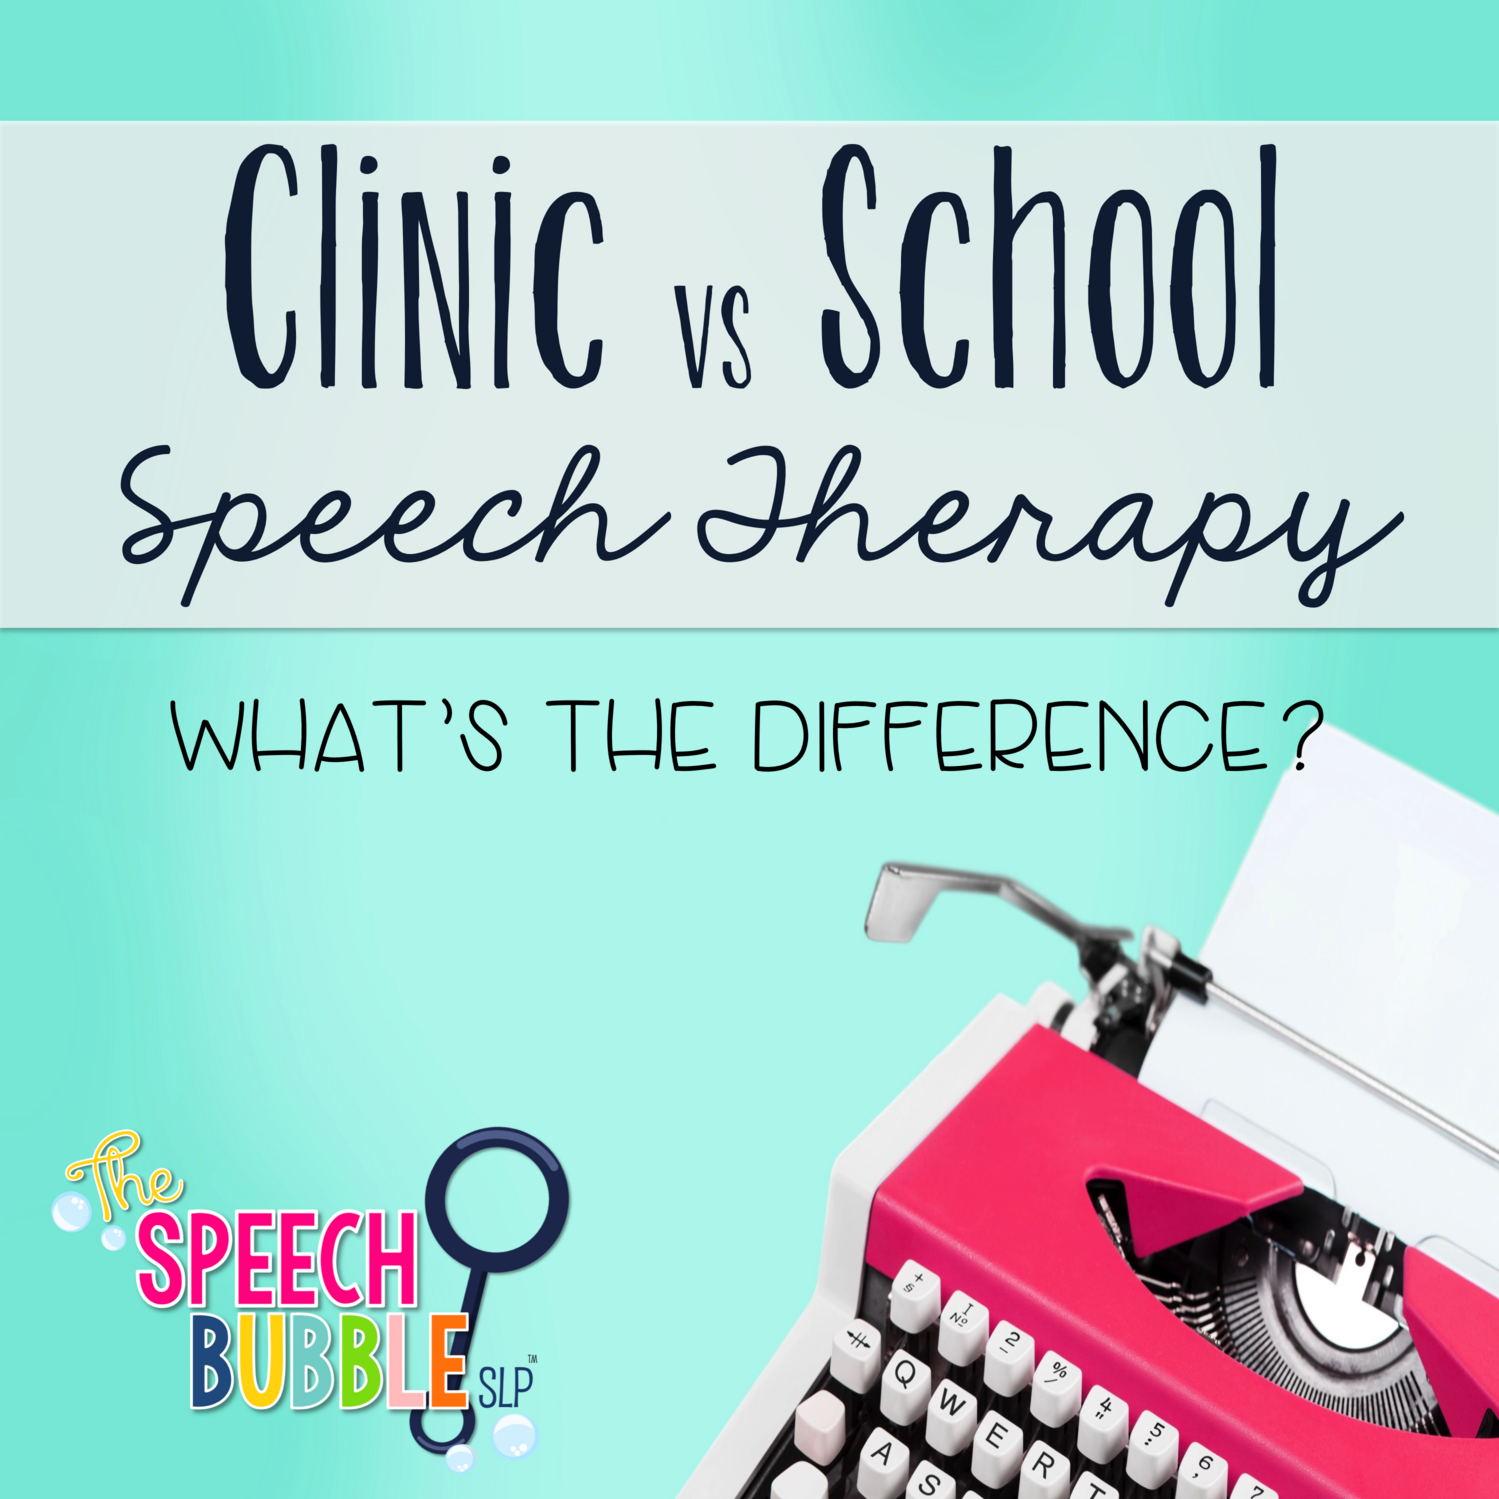 Clinics vs School Speech: What’s the Difference?